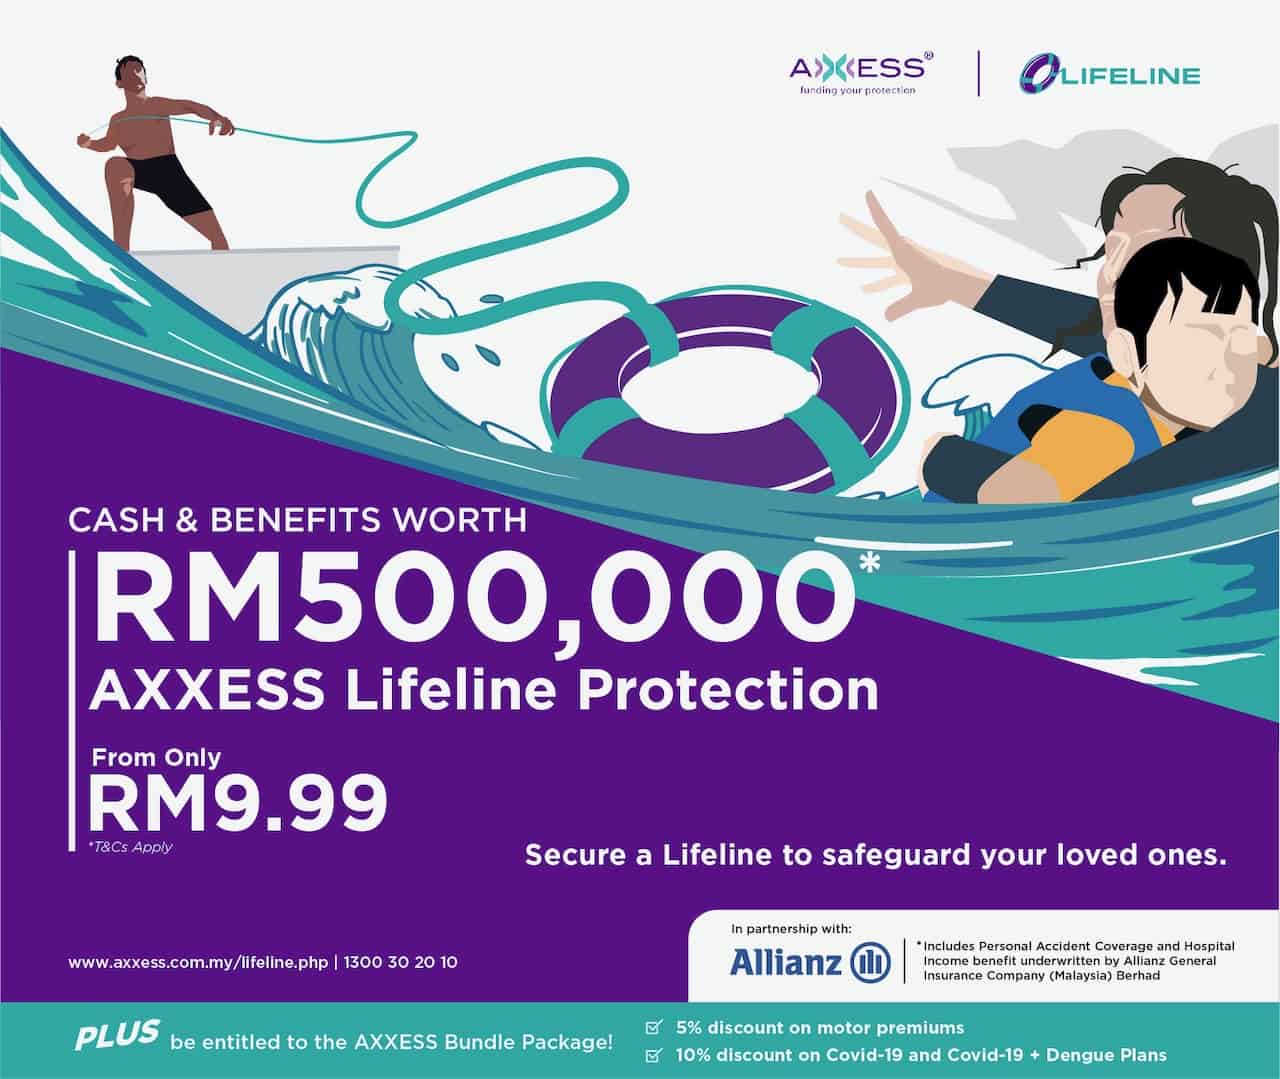 AXXESS extends a Lifeline to everyone in Malaysia